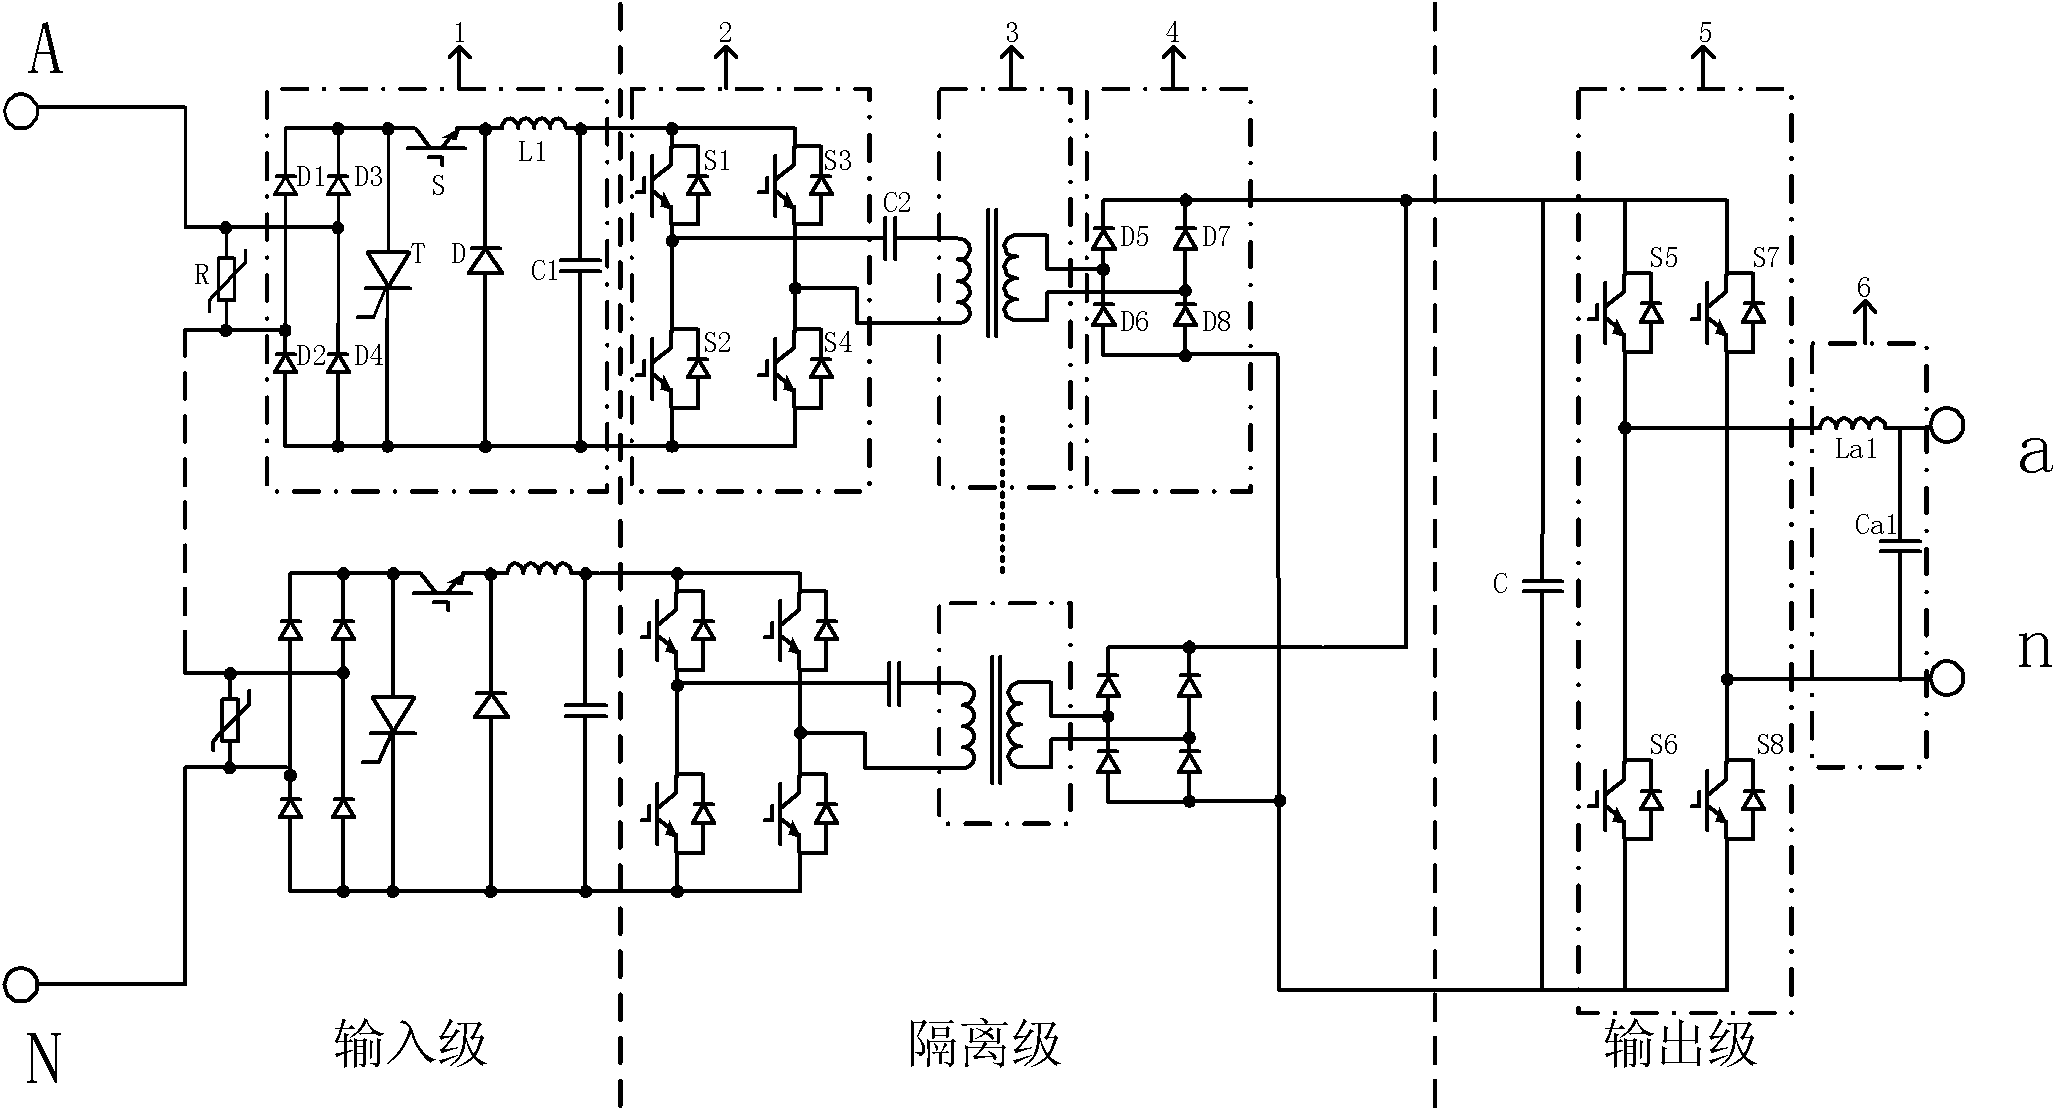 Power electronic transformer based on simple PFC (Power Factor Correction)